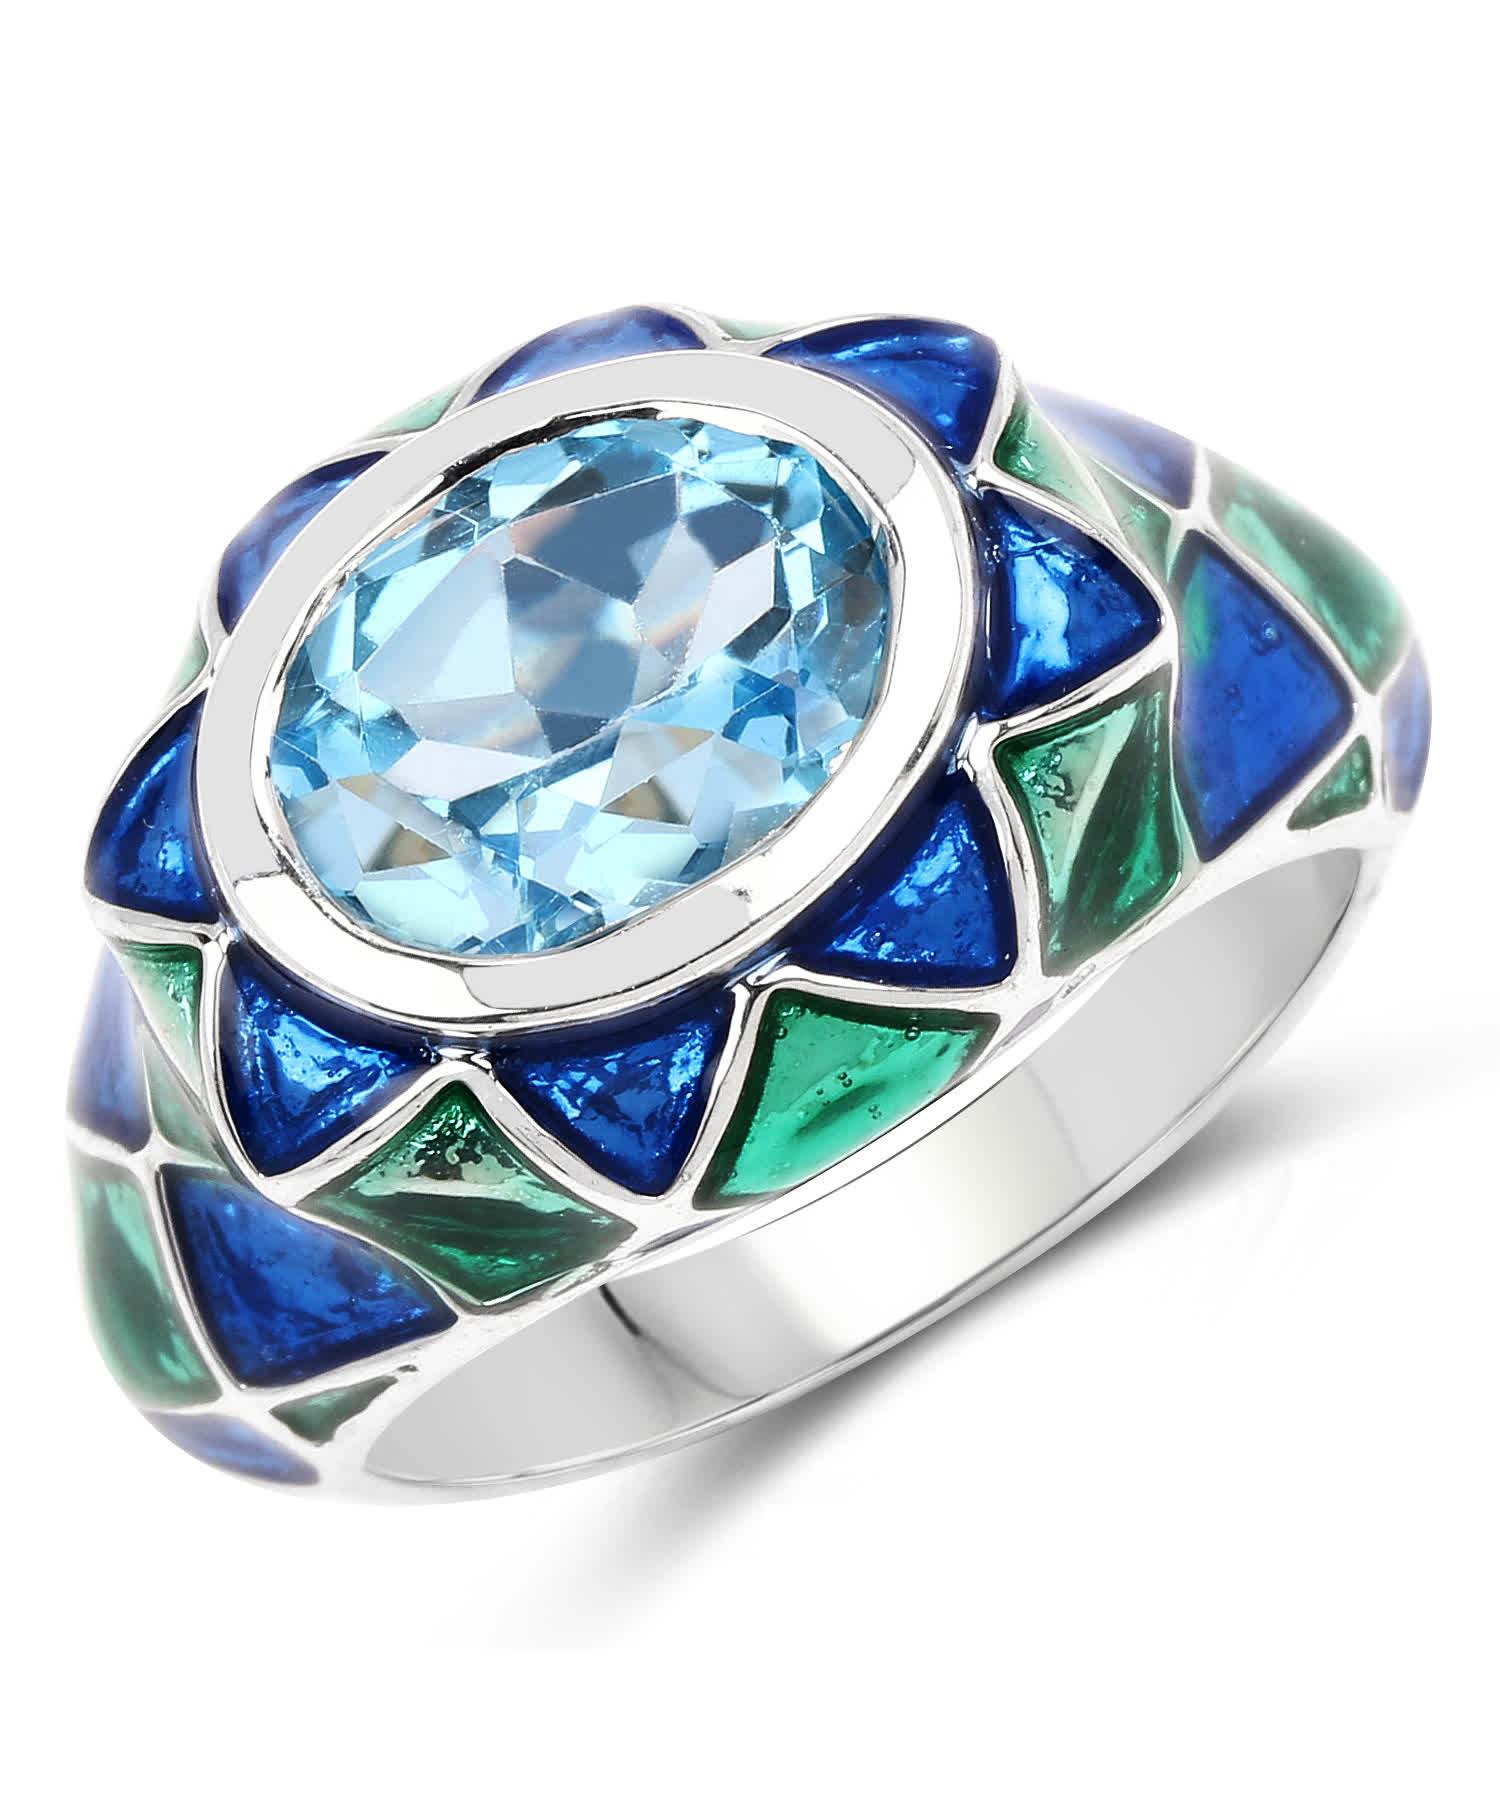 3.25ctw Natural Swiss Blue Topaz Rhodium Plated 925 Sterling Silver Cocktail Ring - With Enamel Inlay View 1